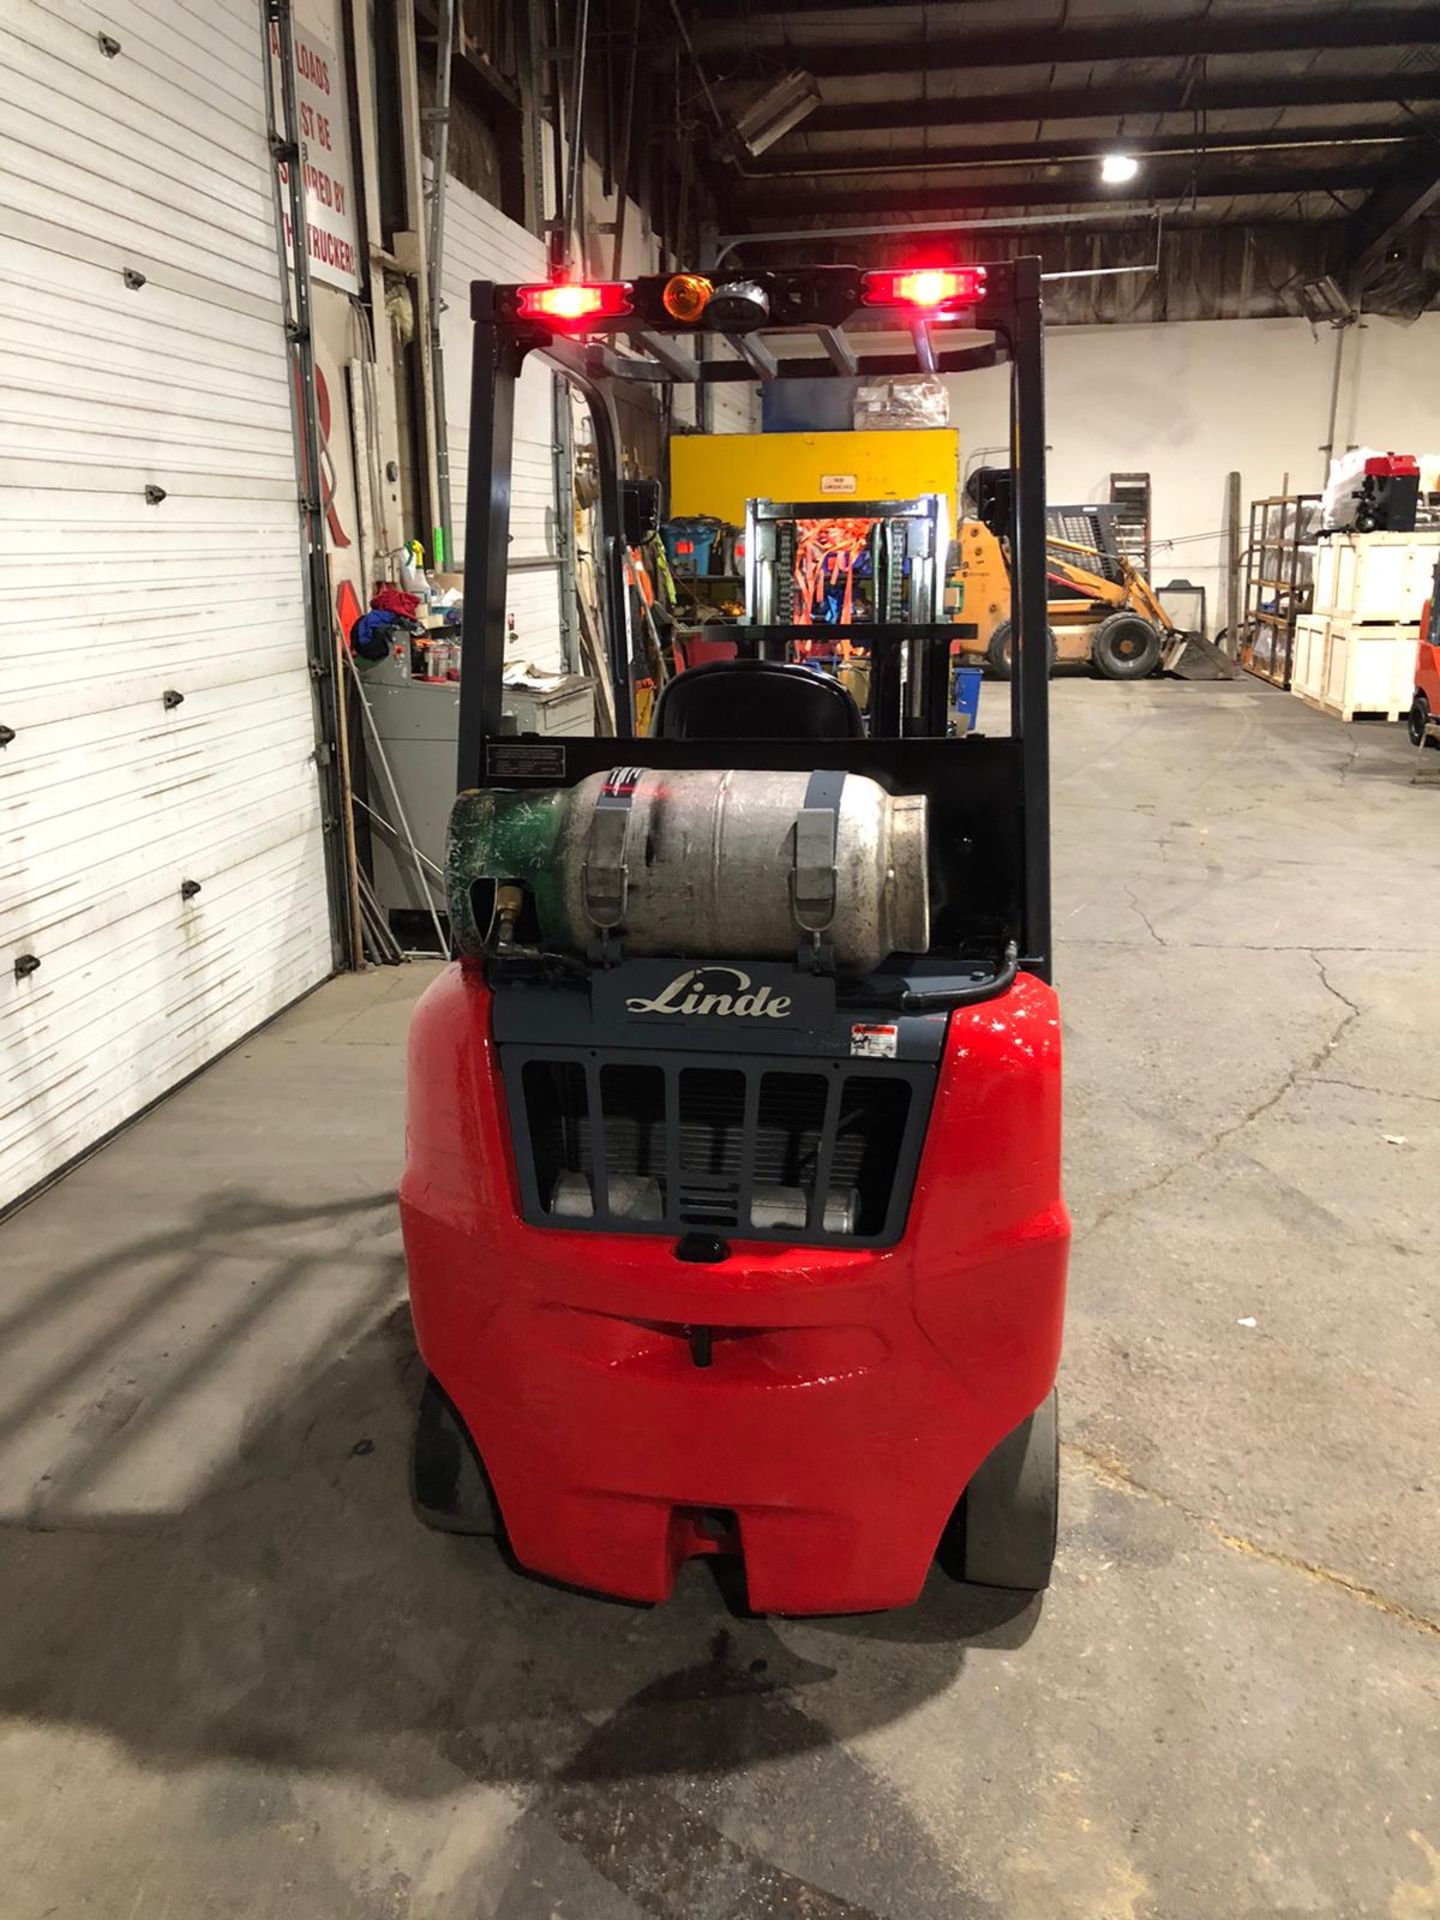 2013 Linde 5000lbs Capacity LPG (Propane) INDOOR Forklift with sideshift (no propane tank included) - Image 4 of 5